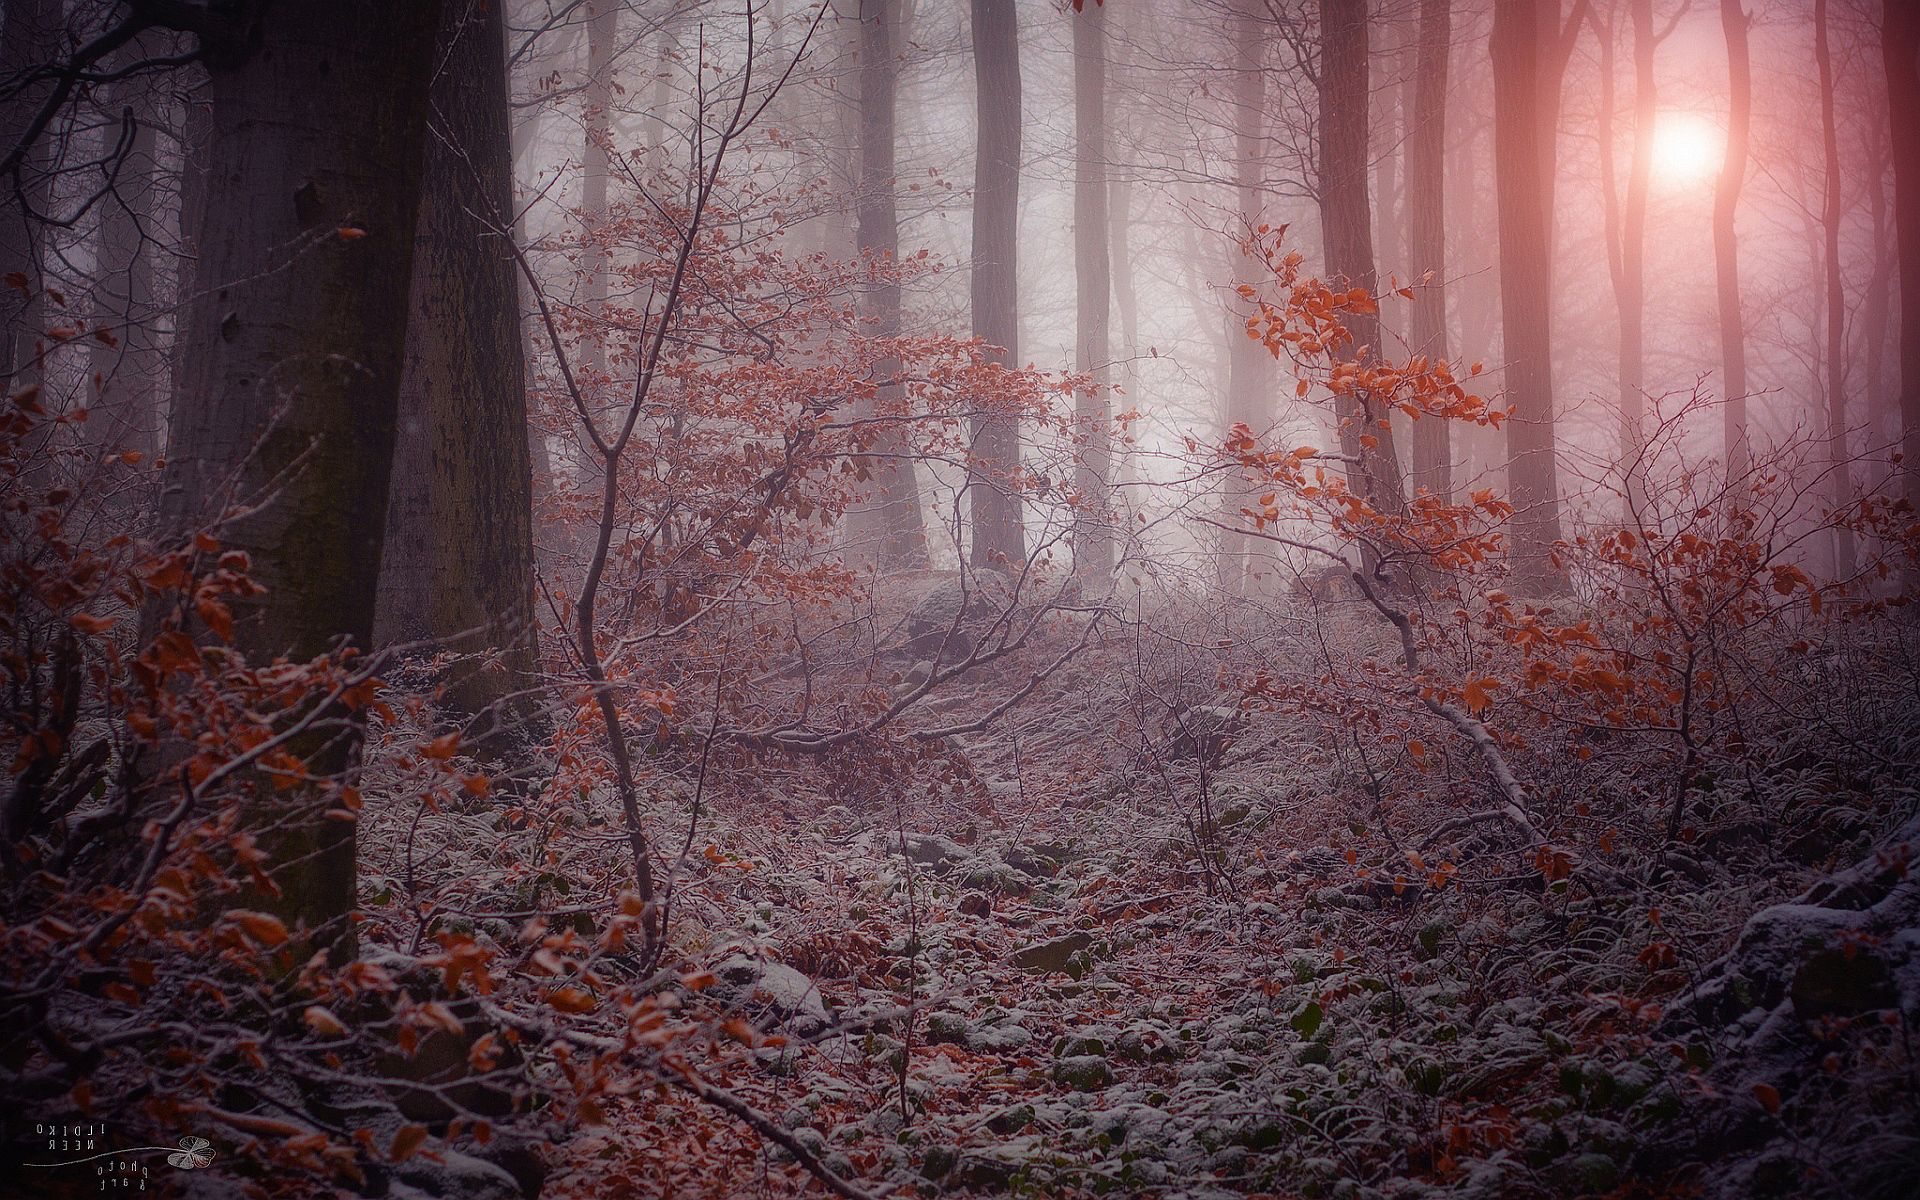 Winter mystic forest Wallpaper. Picture. Forest wallpaper, Mystical forest, Foggy forest